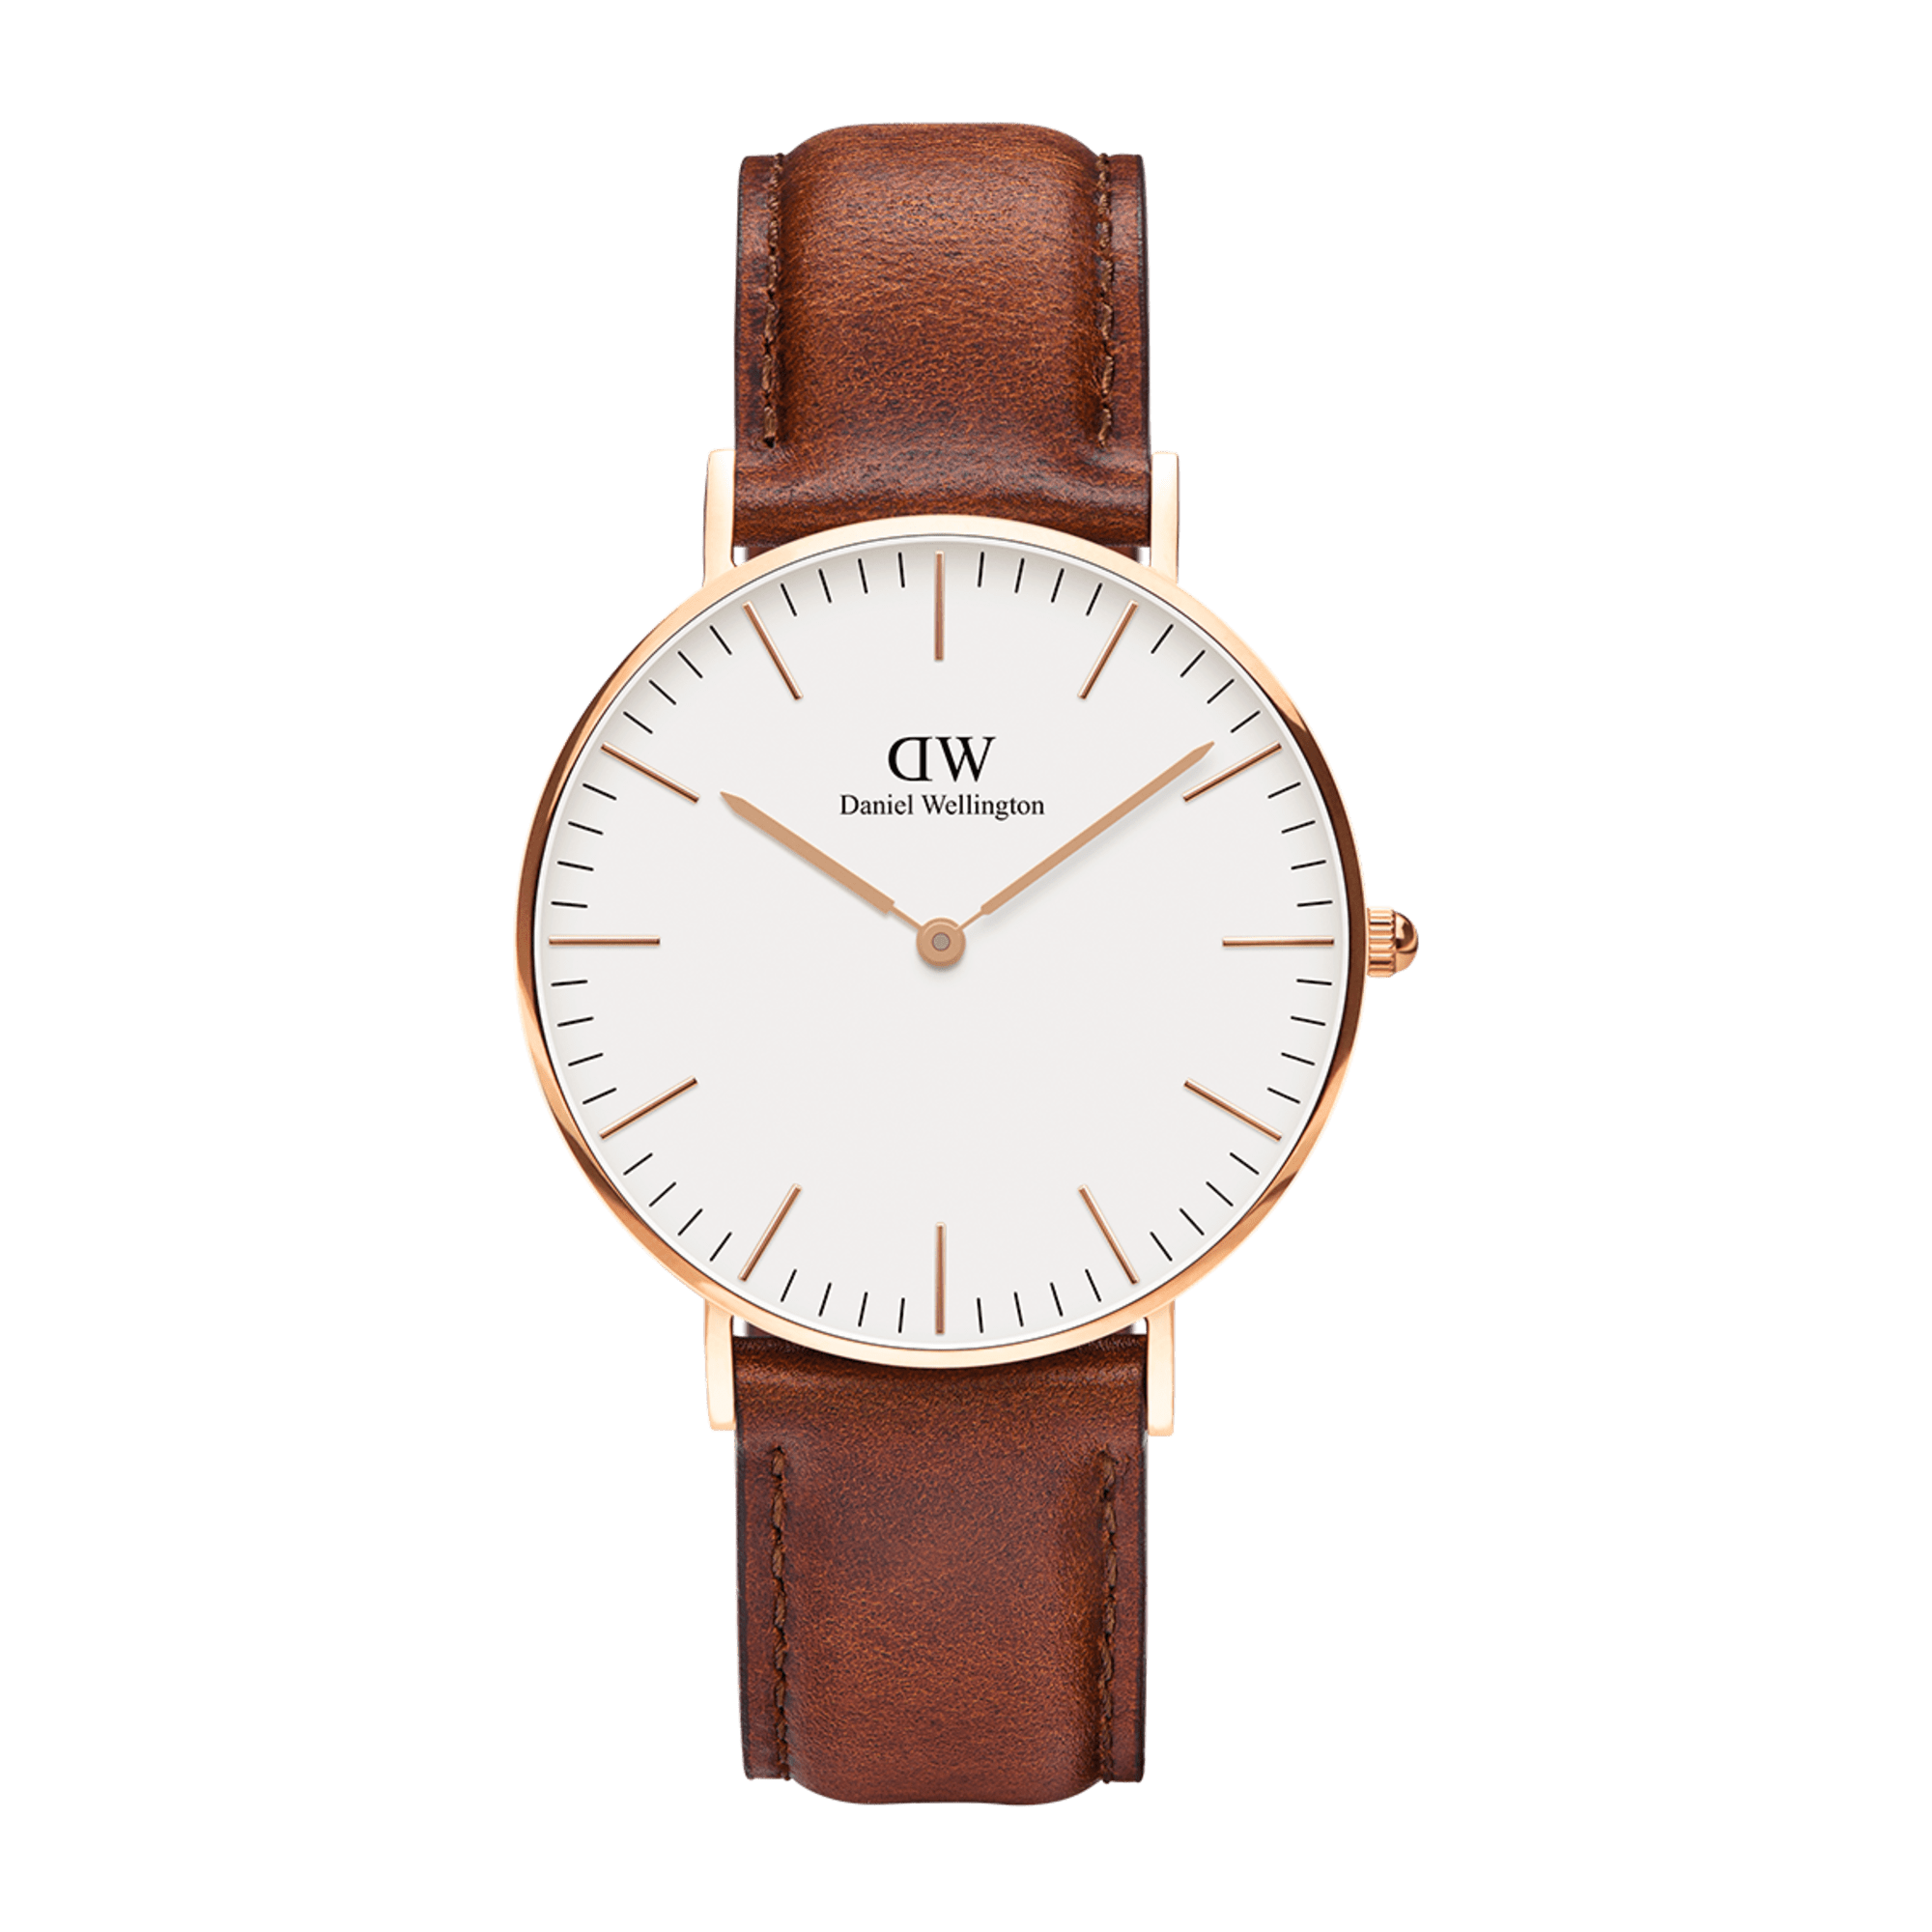 Leather Watches For Men: Brown & Black Leather Band Men's Watches - Skagen